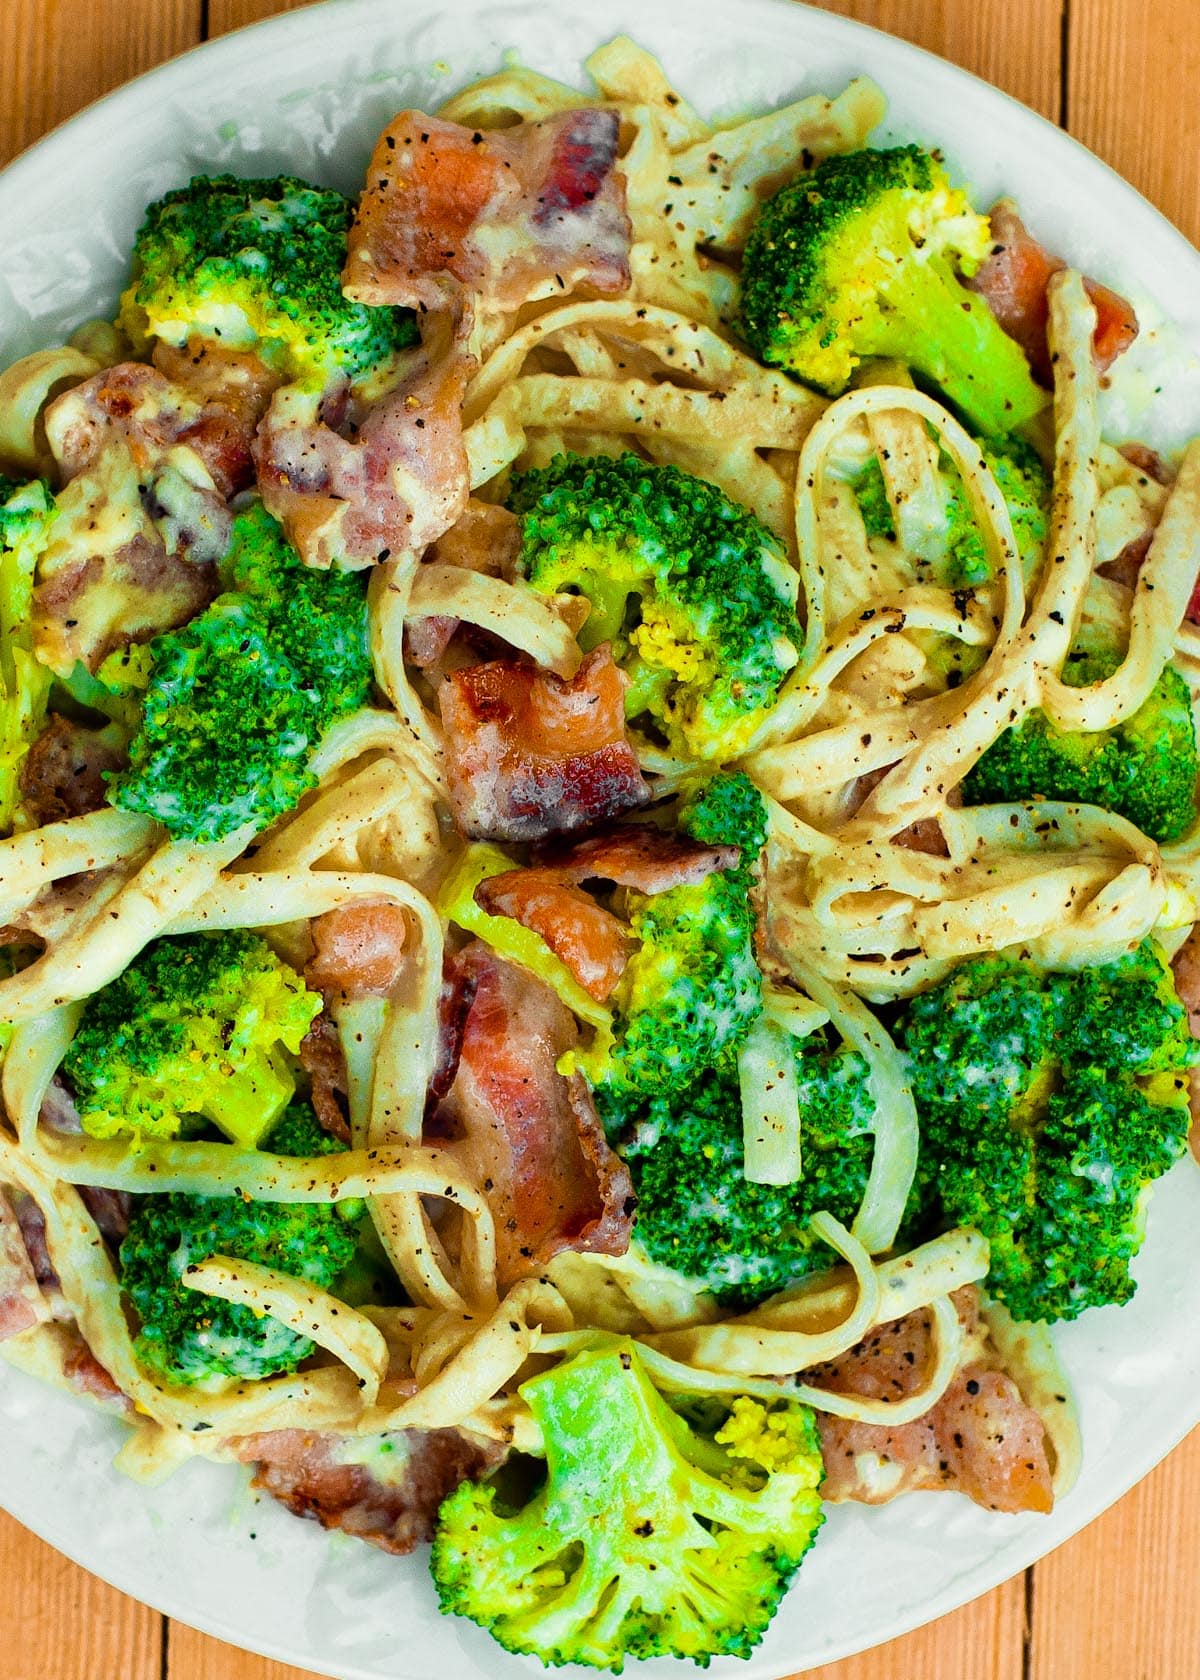 Bacon and Broccoli Pasta in Cheesy Sauce